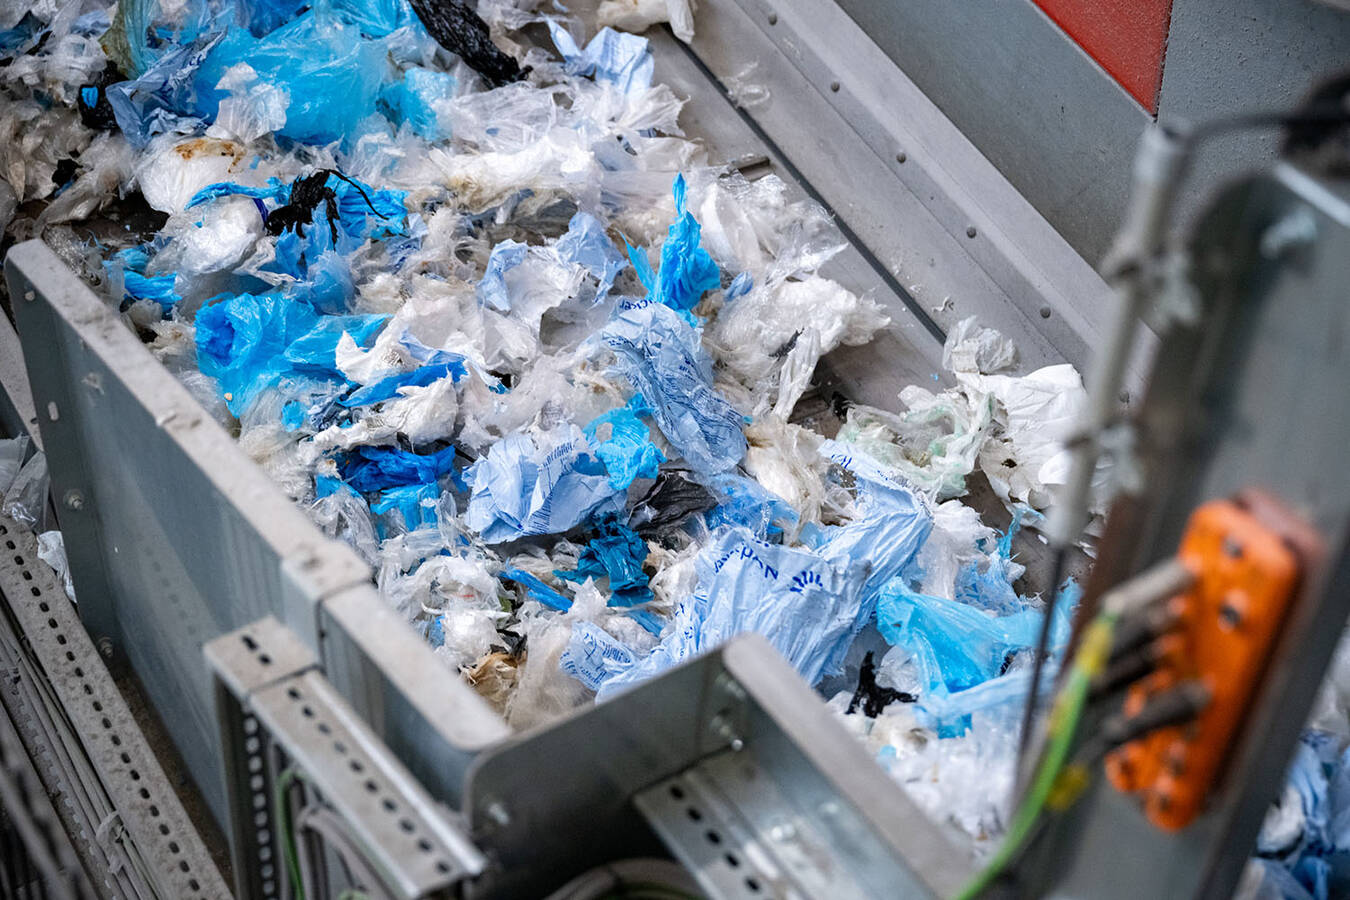 Optimum particle size for NIR sorting.After the bale opening, the films are shredded to an exact size of A4/A3. This enables downstream NIR systems to optimally recognise materials and sort them more efficiently.